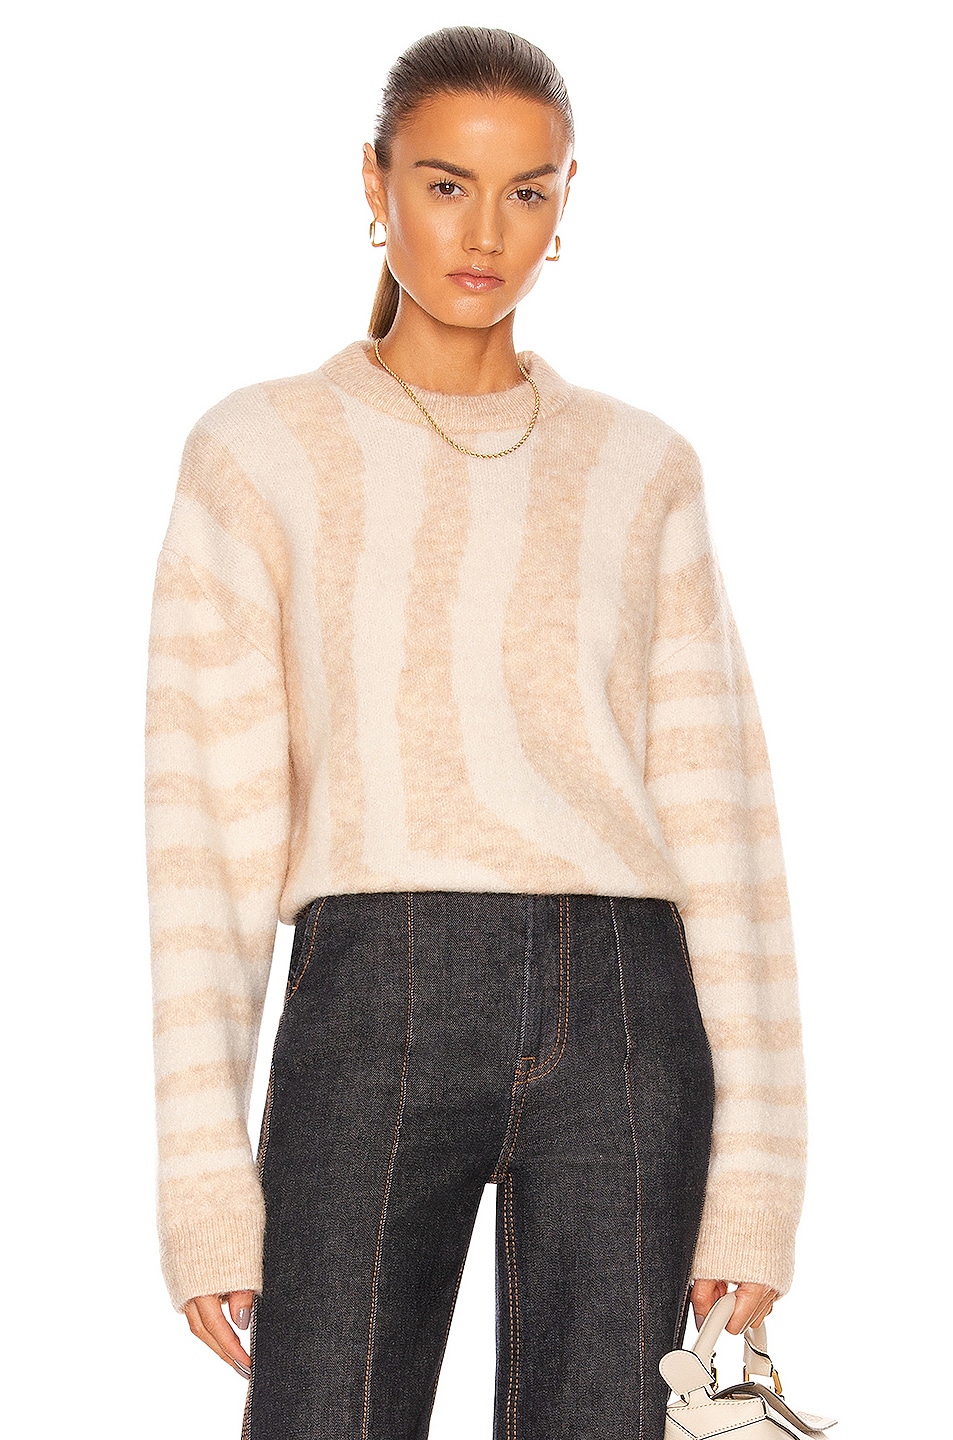 REMAIN Cami Knit Sweater in Pastel Parchment Combo | FWRD